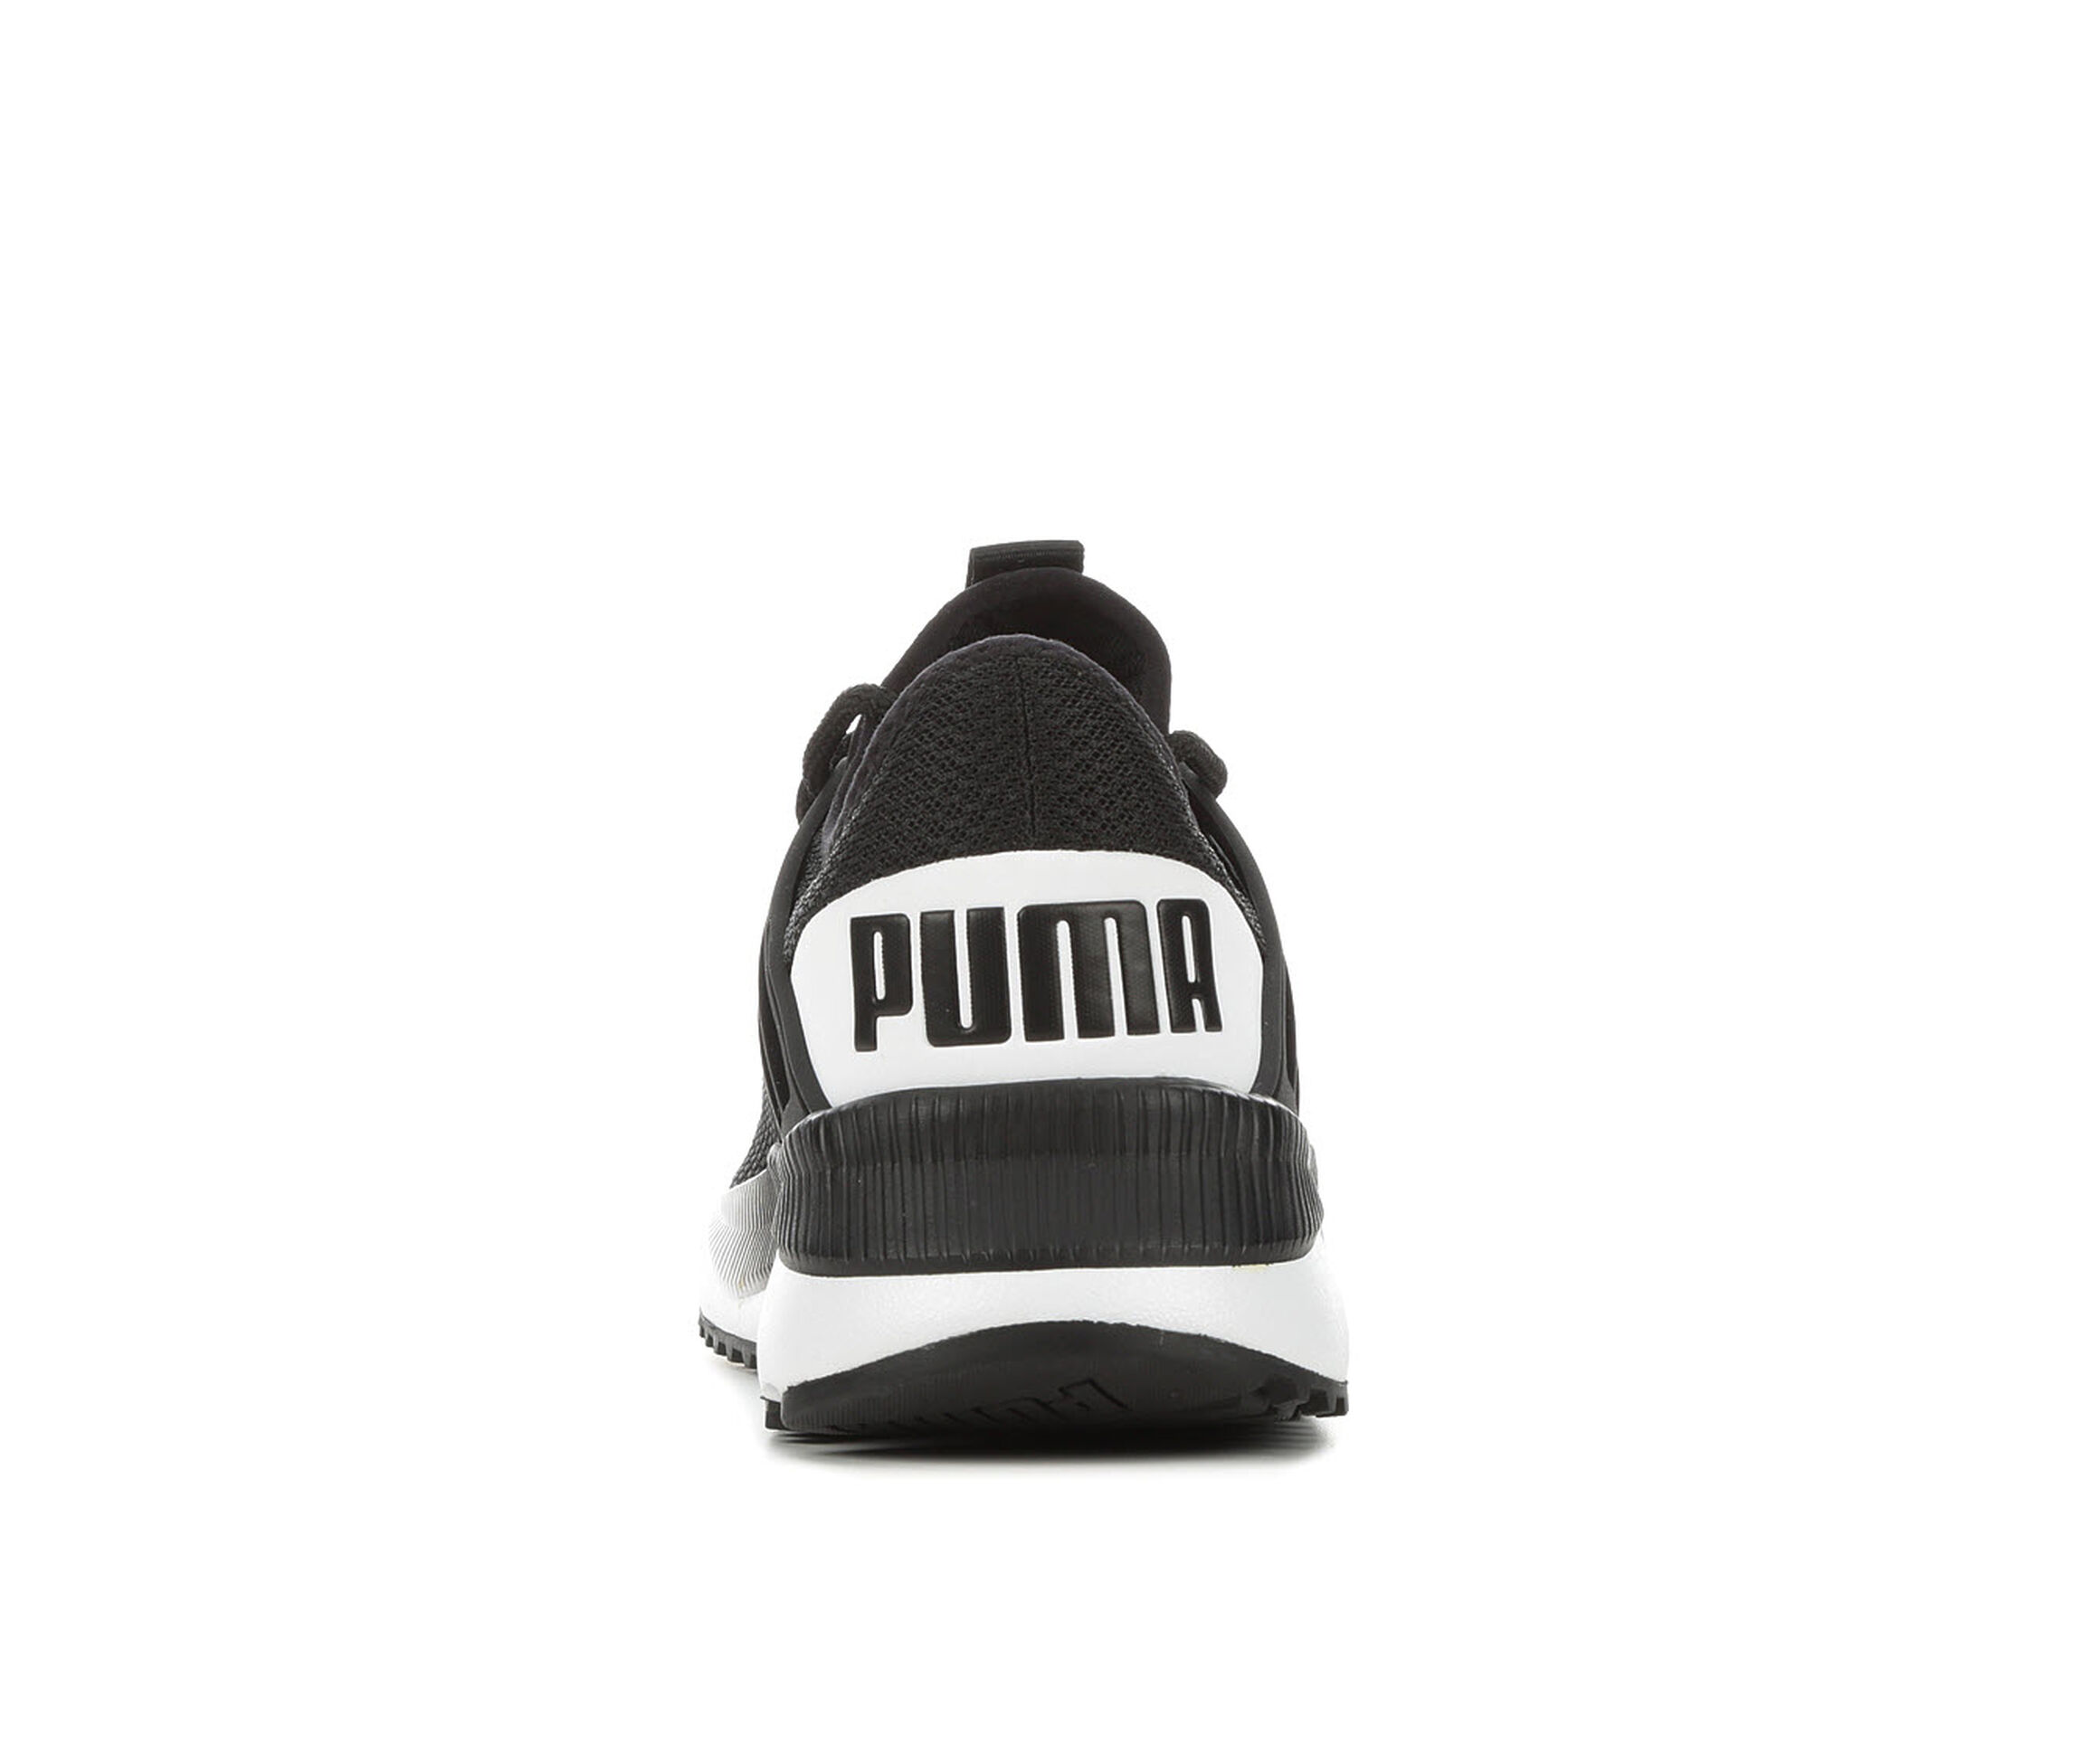 Puma Sneakers, Slides, and Accessories | Shoe Carnival